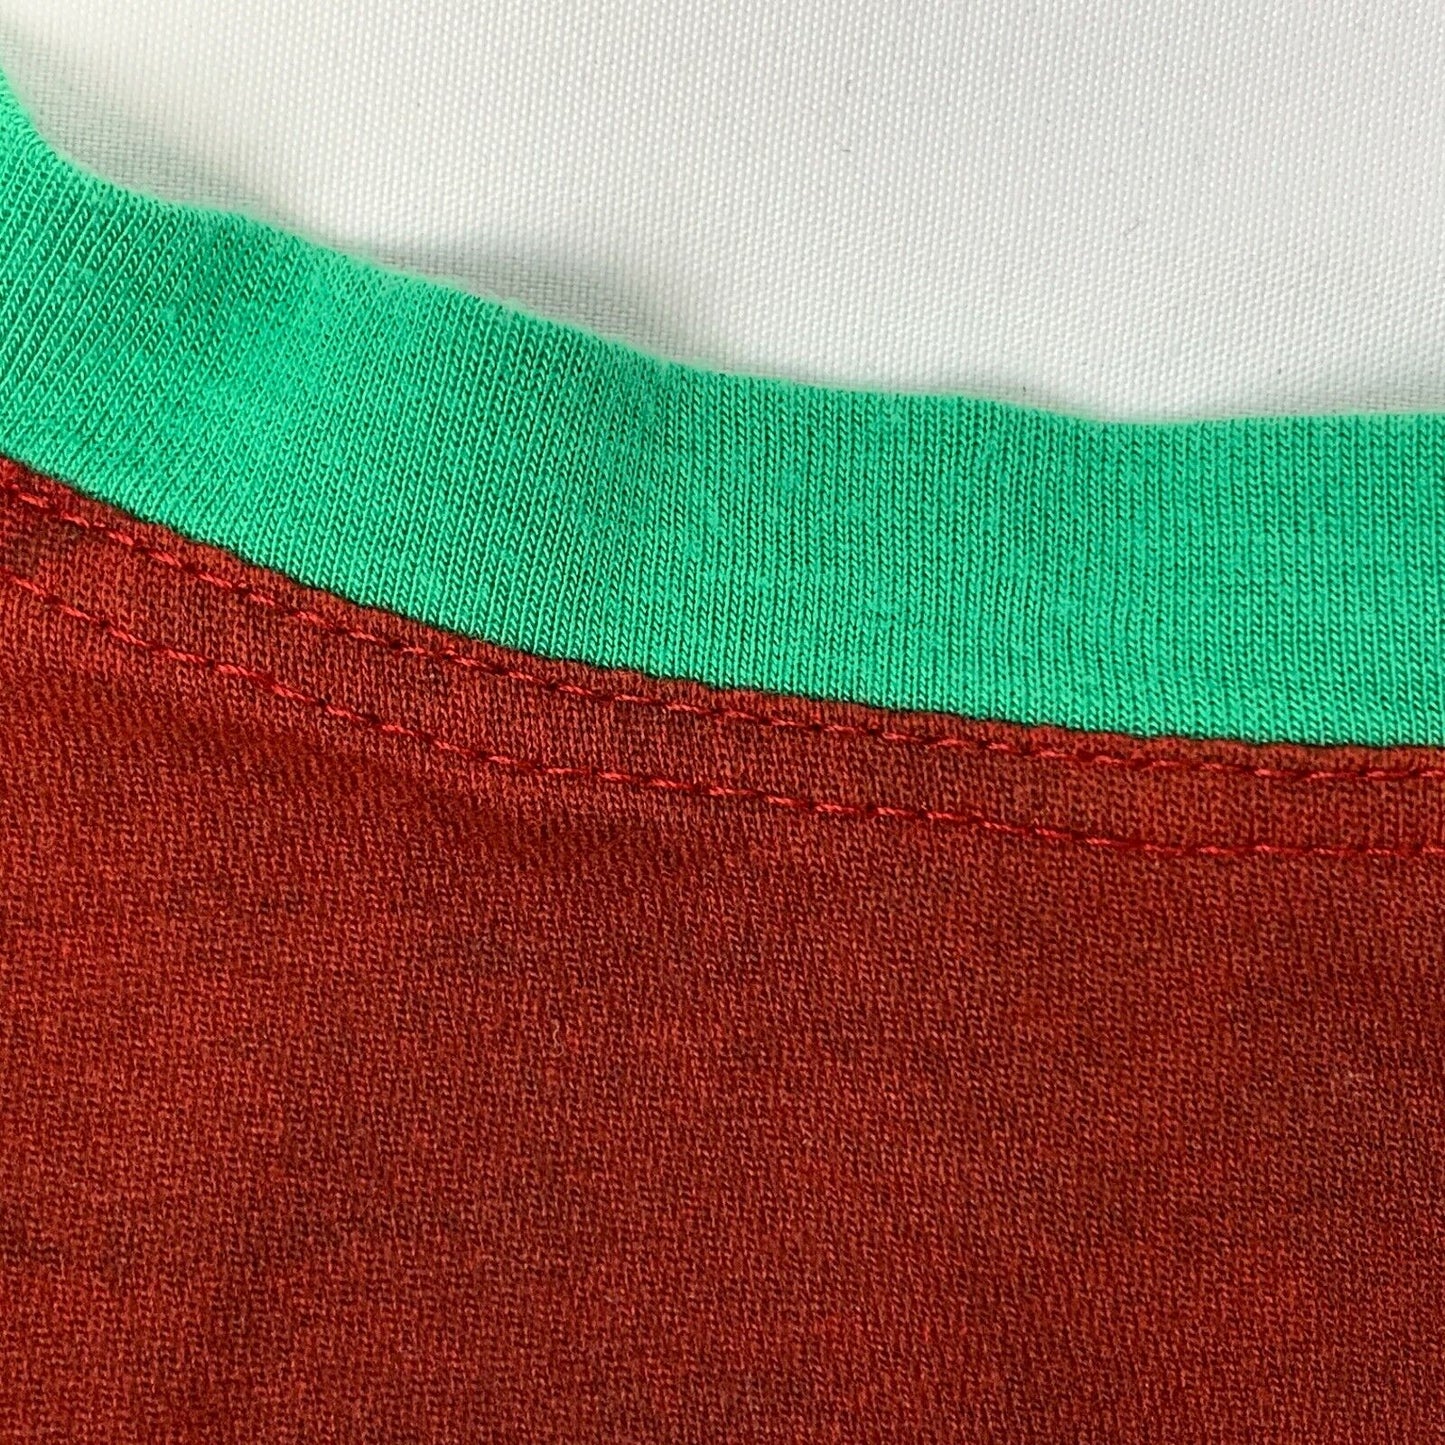 Fendi Womens Tank Top Shirt Red Green Scoop Neck Rayon Silk Italy Size 40 US S 4